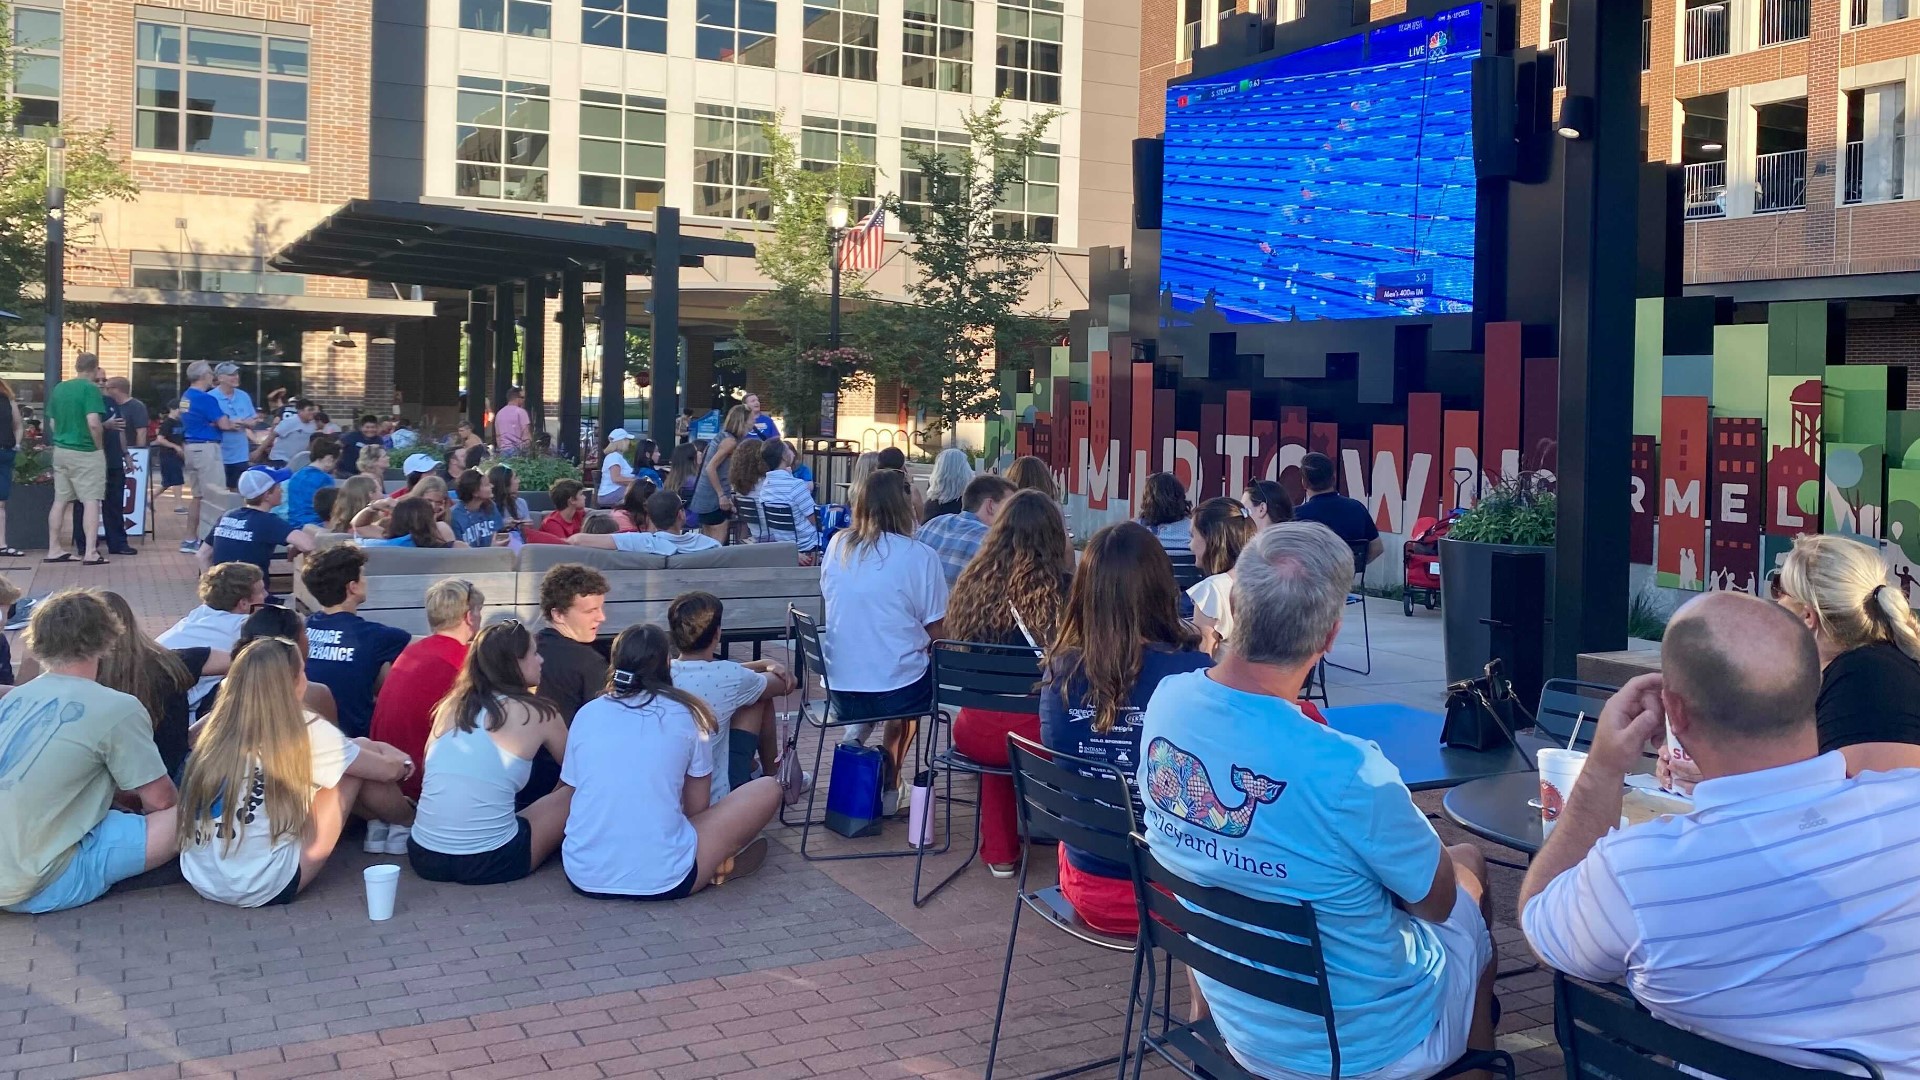 Swimmers, alumni, families and fans gathered at Carmel's Midtown Plaza to cheer on eight swimmers from the Carmel Swim Club during the U.S. Olympic Trials.